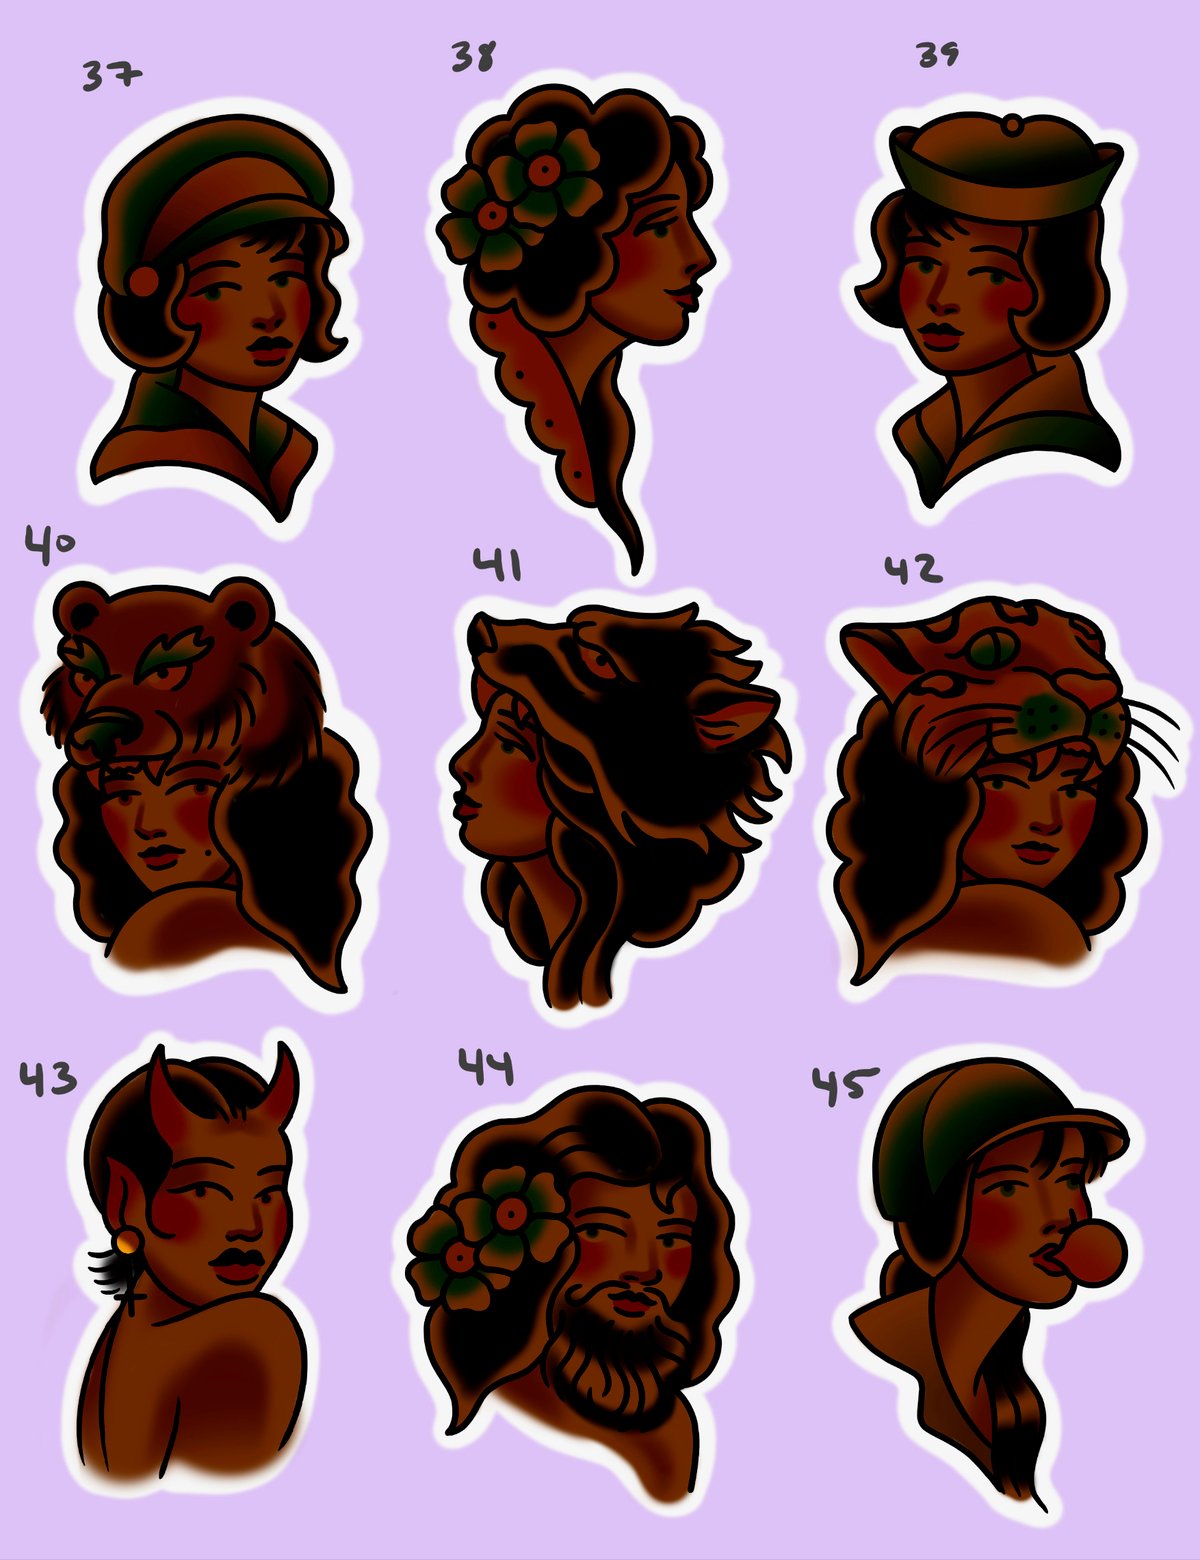 Image of 37 - 45 Lady Heads w/ Melanated Option & FREE COLOR TEST